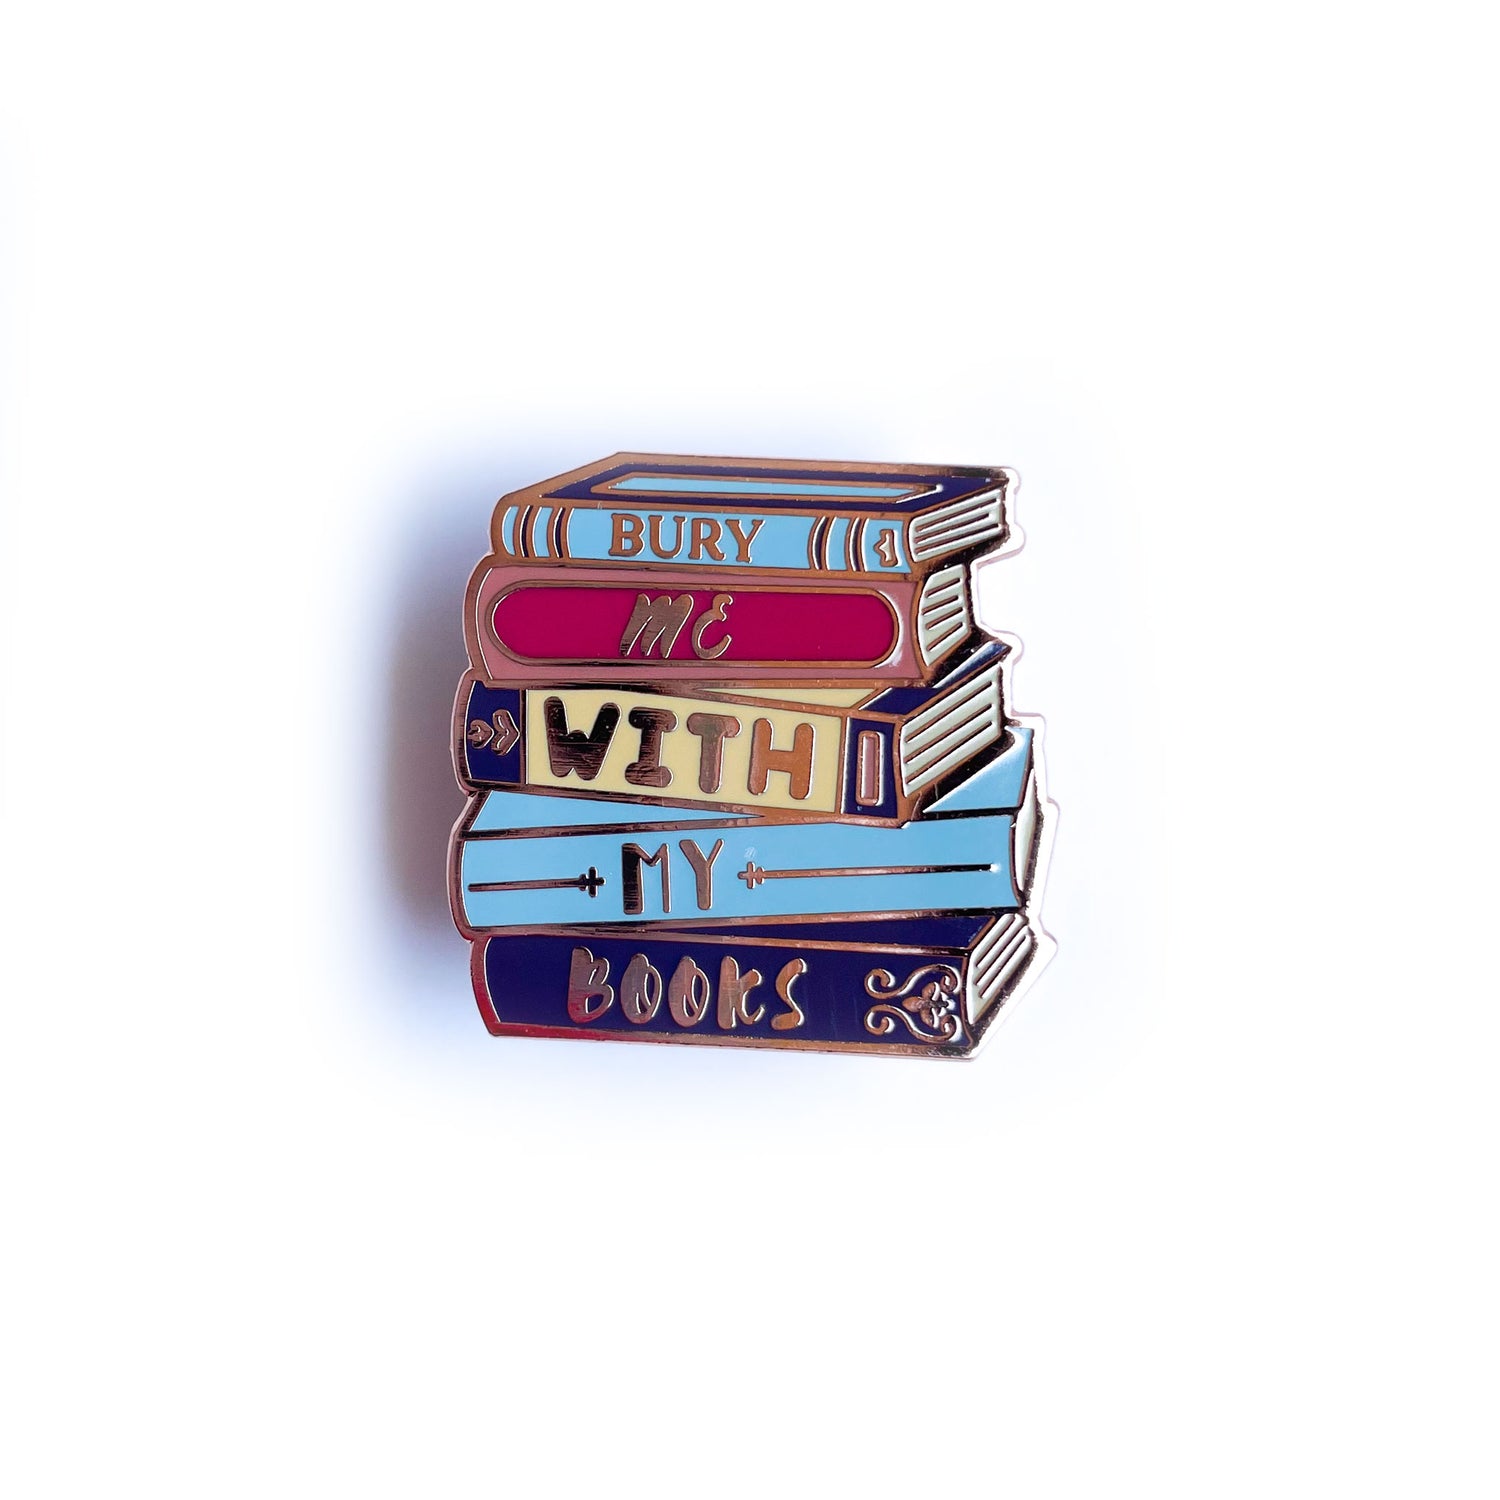 An enamel pin that is shaped like a stack of books that reads "Bury Me With My Books"